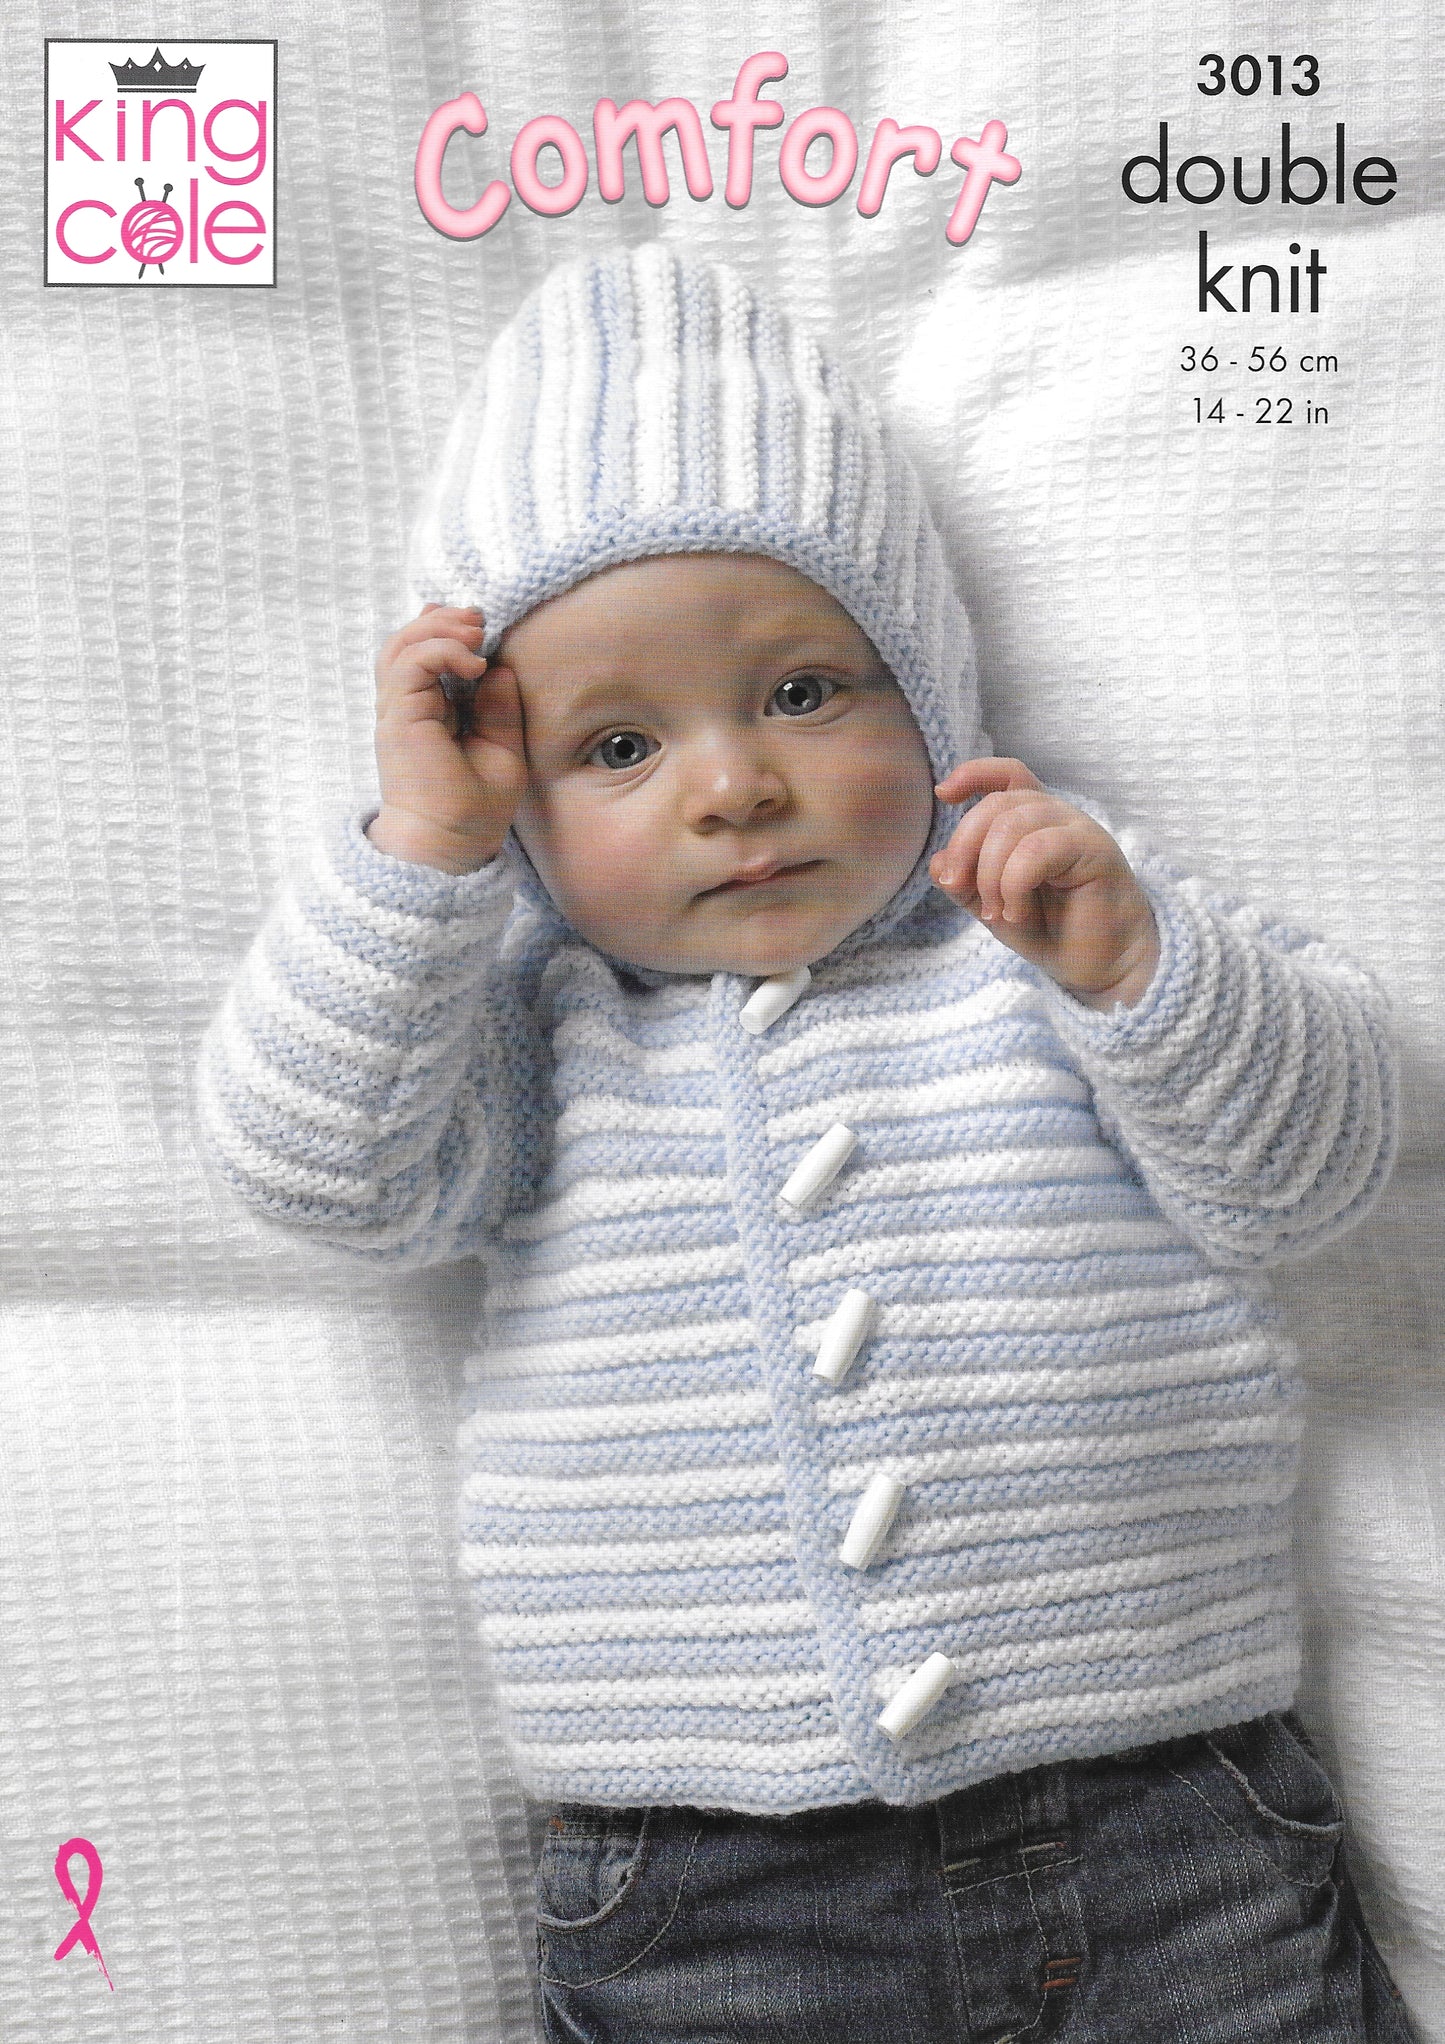 3013 King Cole Knitting Pattern. Child's Jackets/Sweater and Body Warmer Double Knit